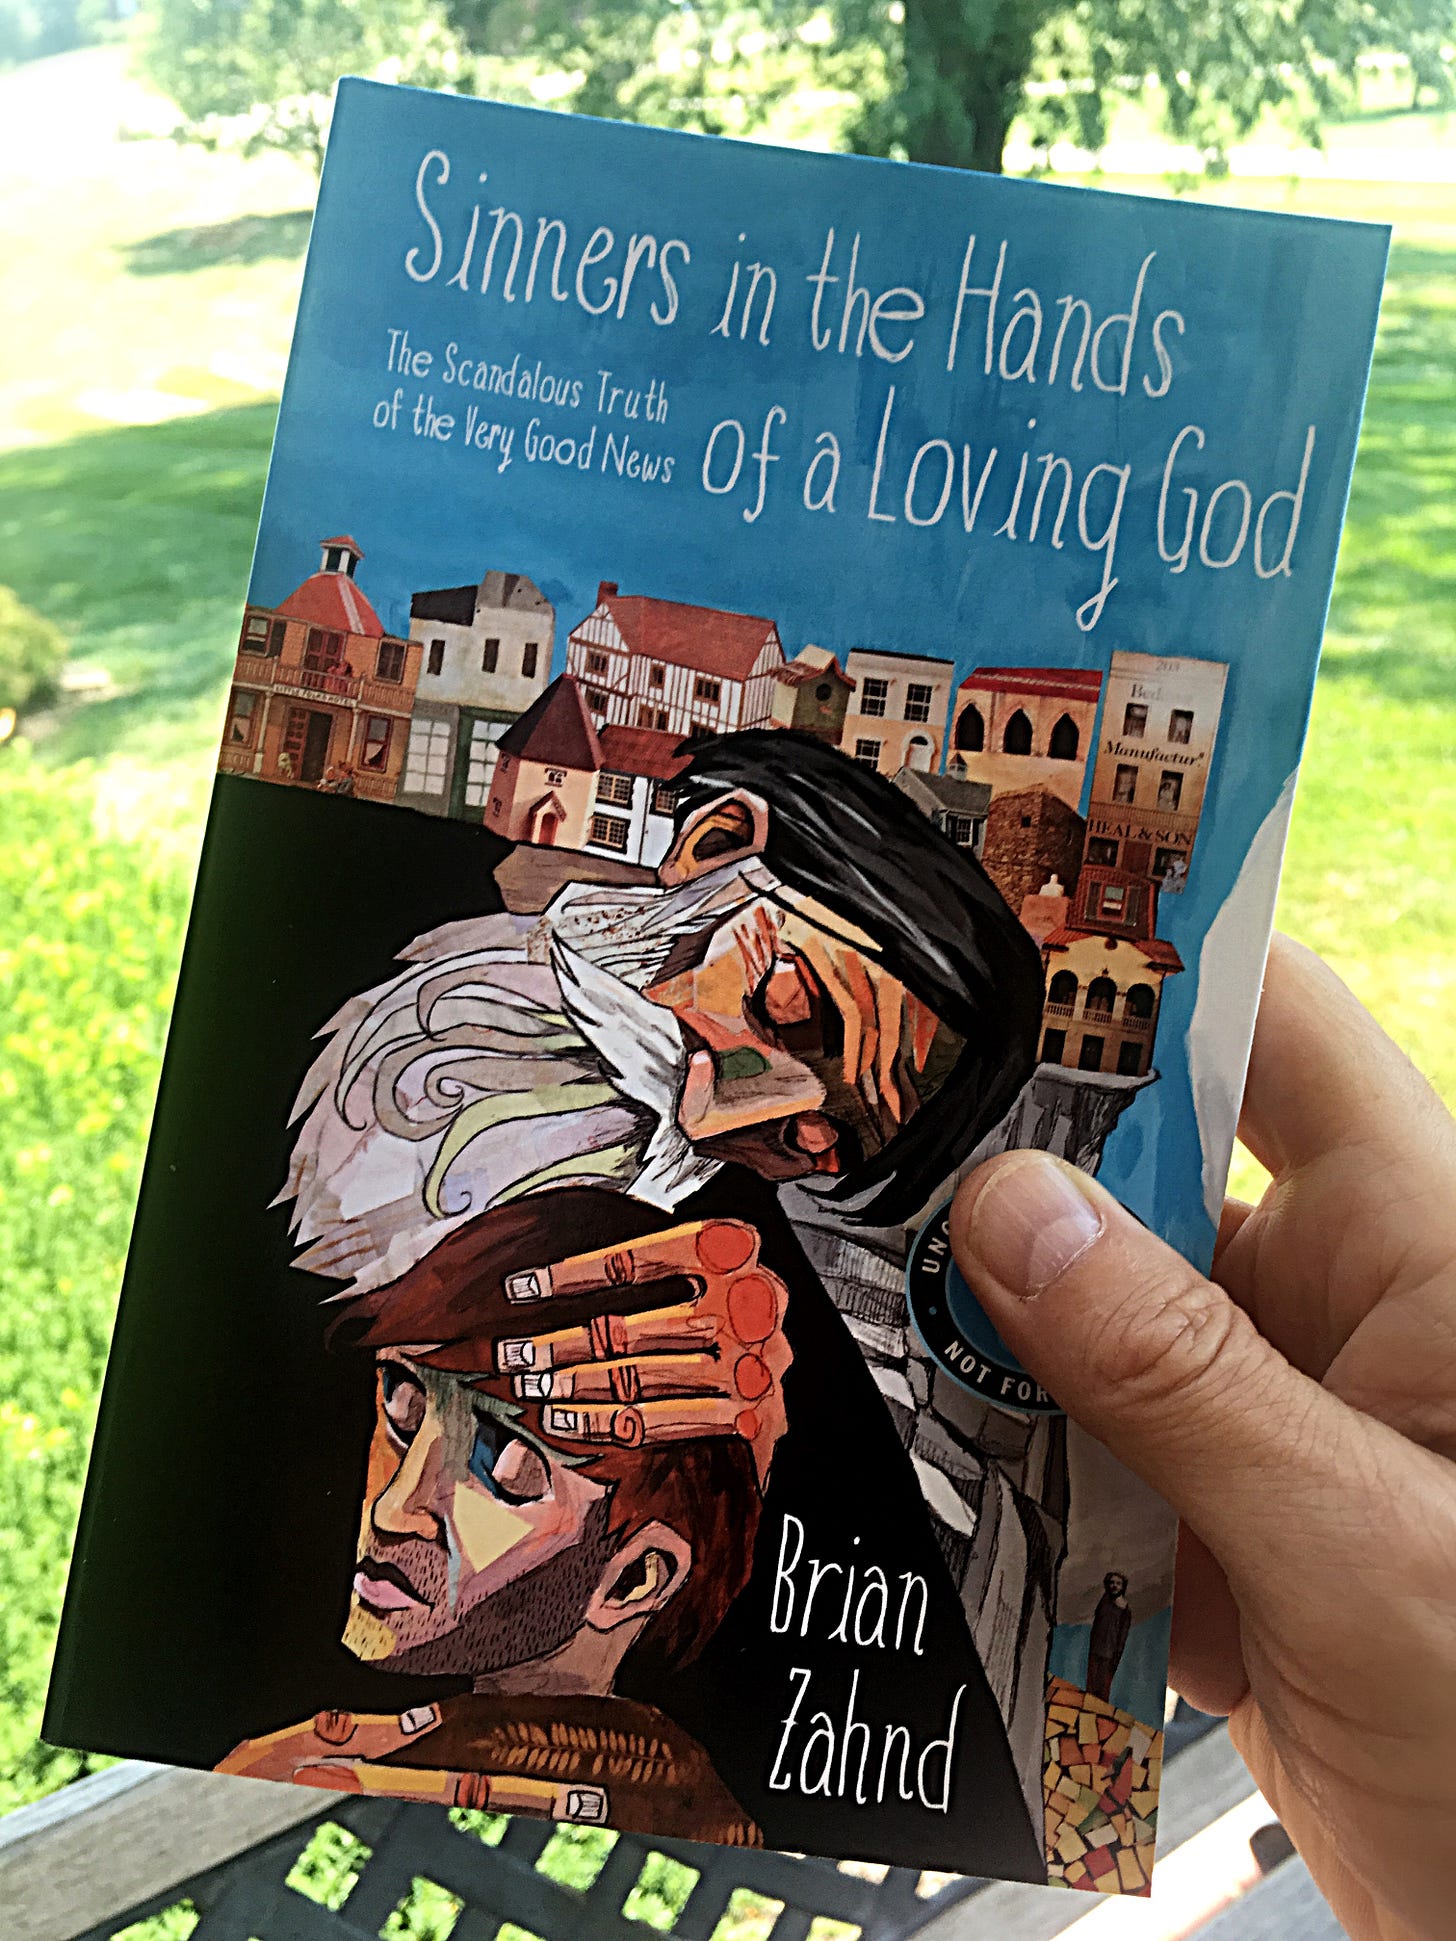 Foreword to "Sinners in the Hands of a Loving God" - Brian Zahnd